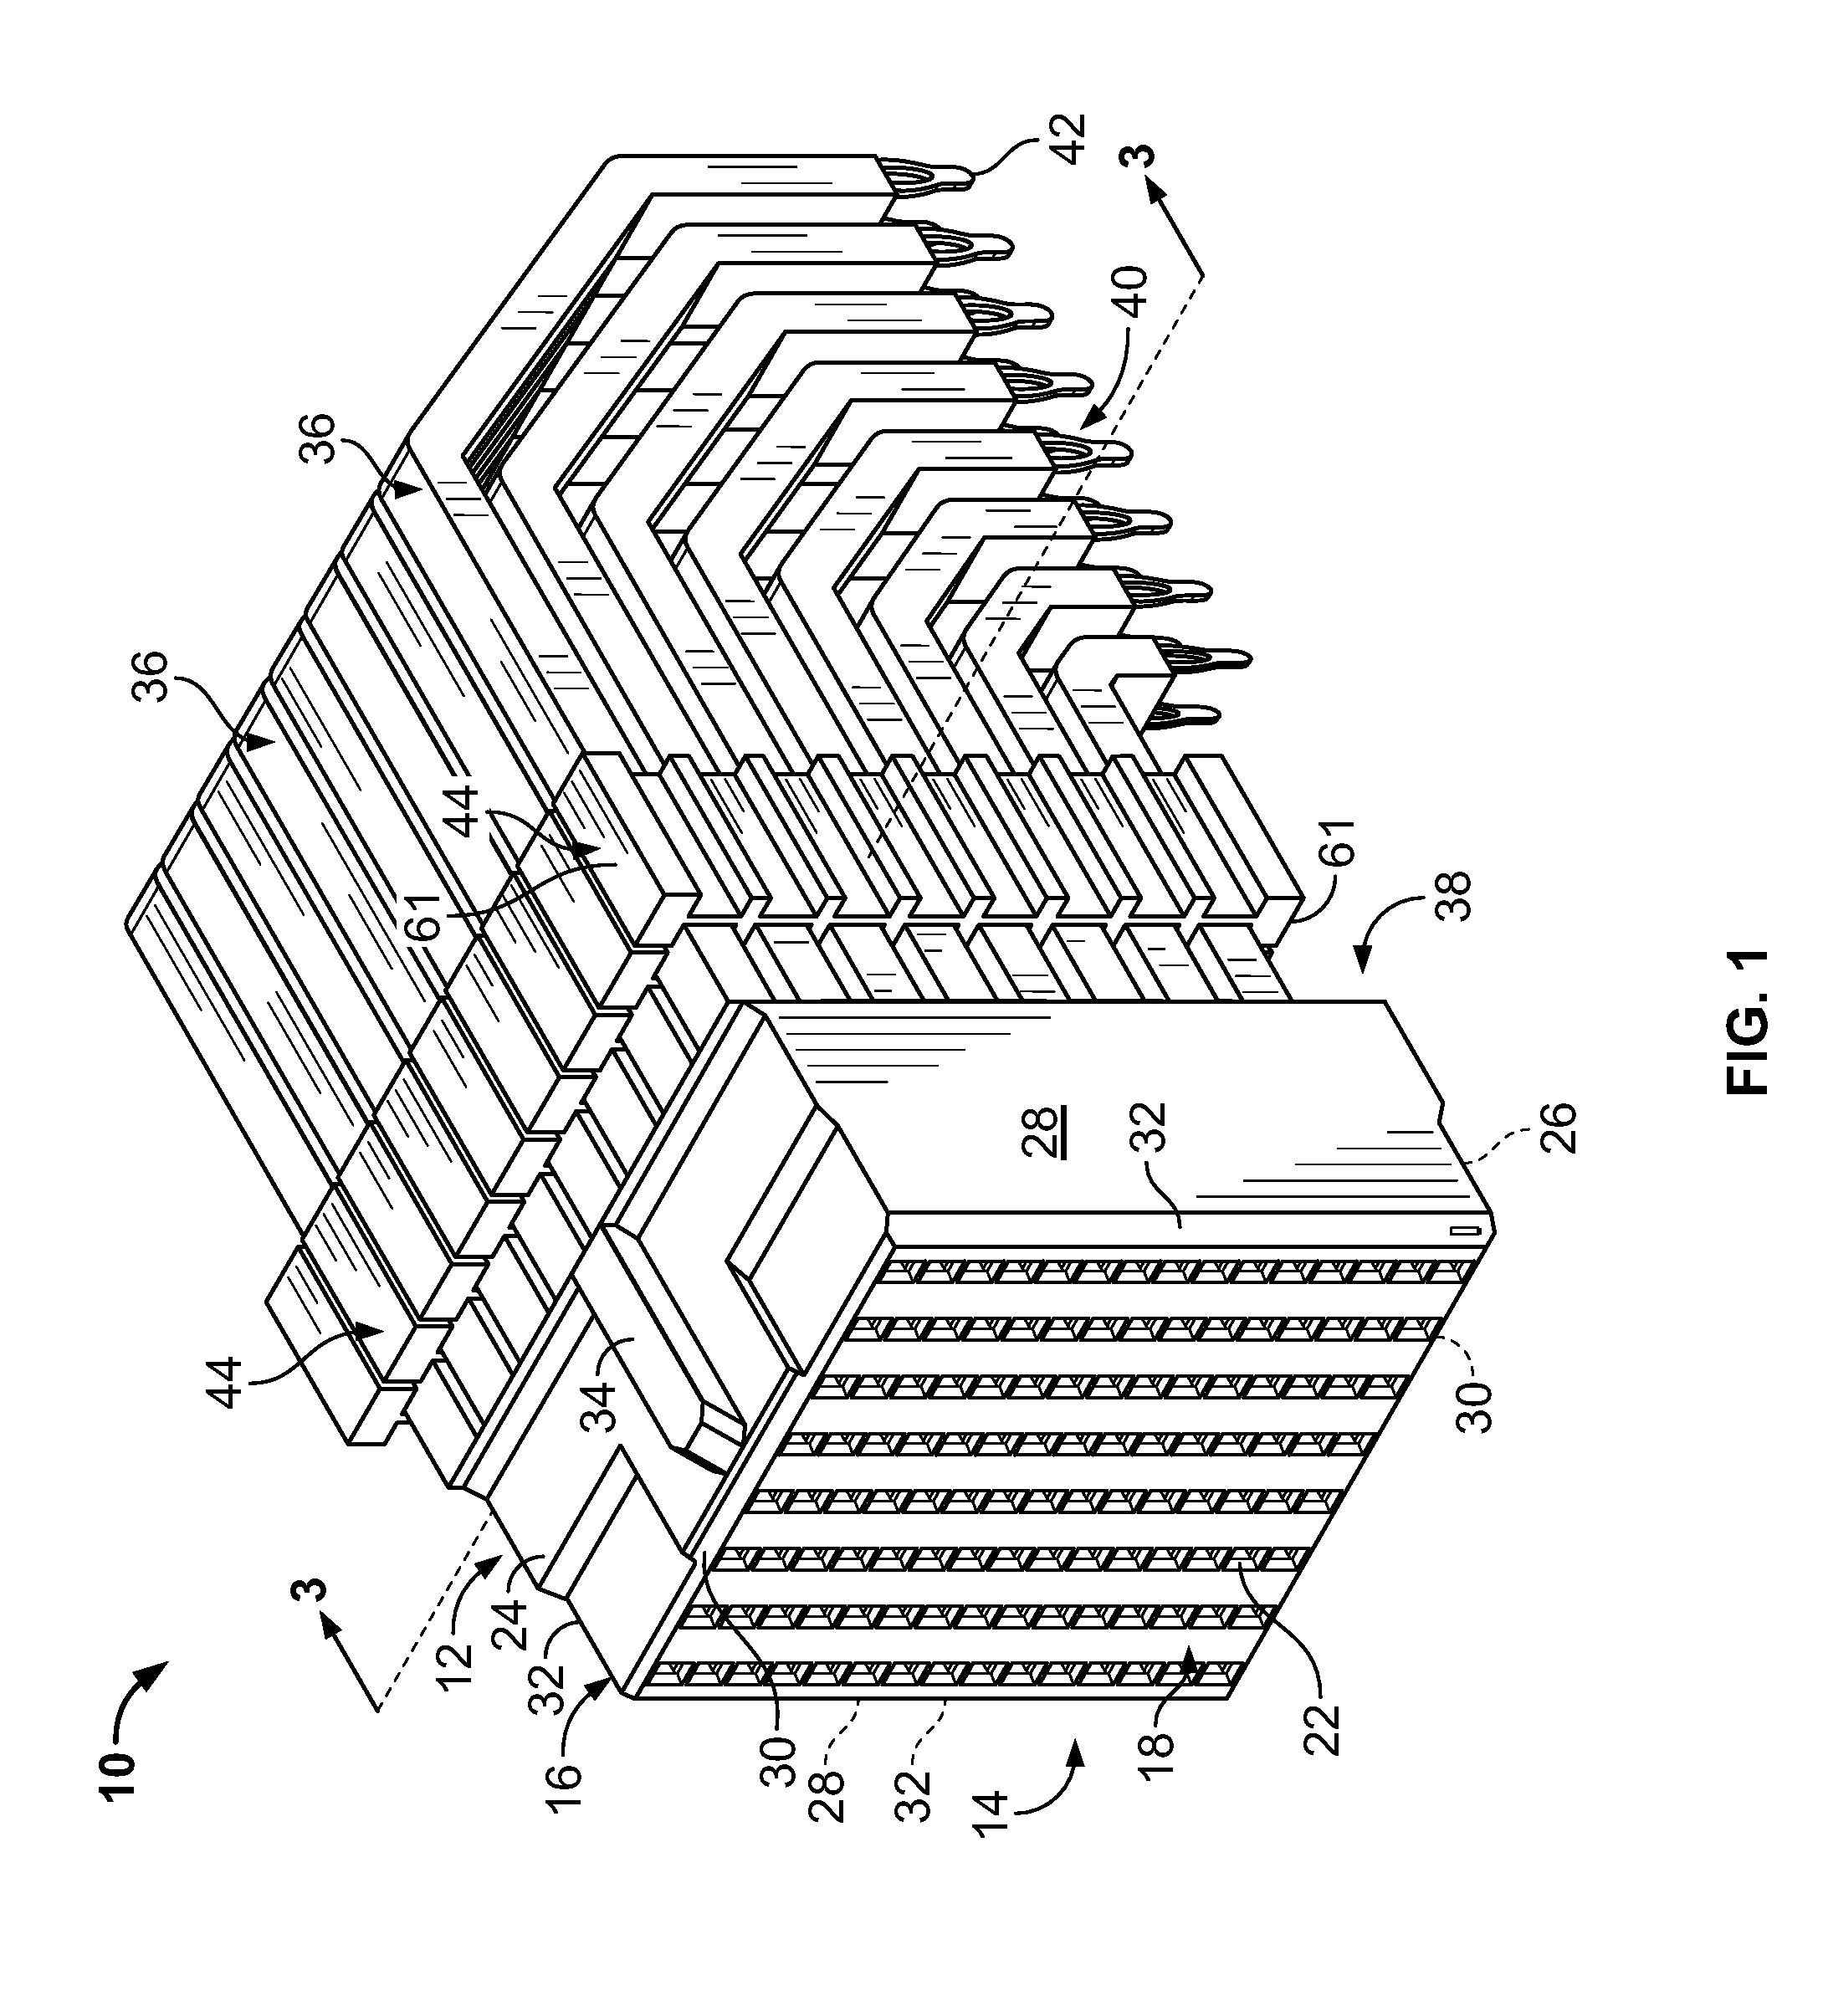 Electrical connector with electrically shielded terminals